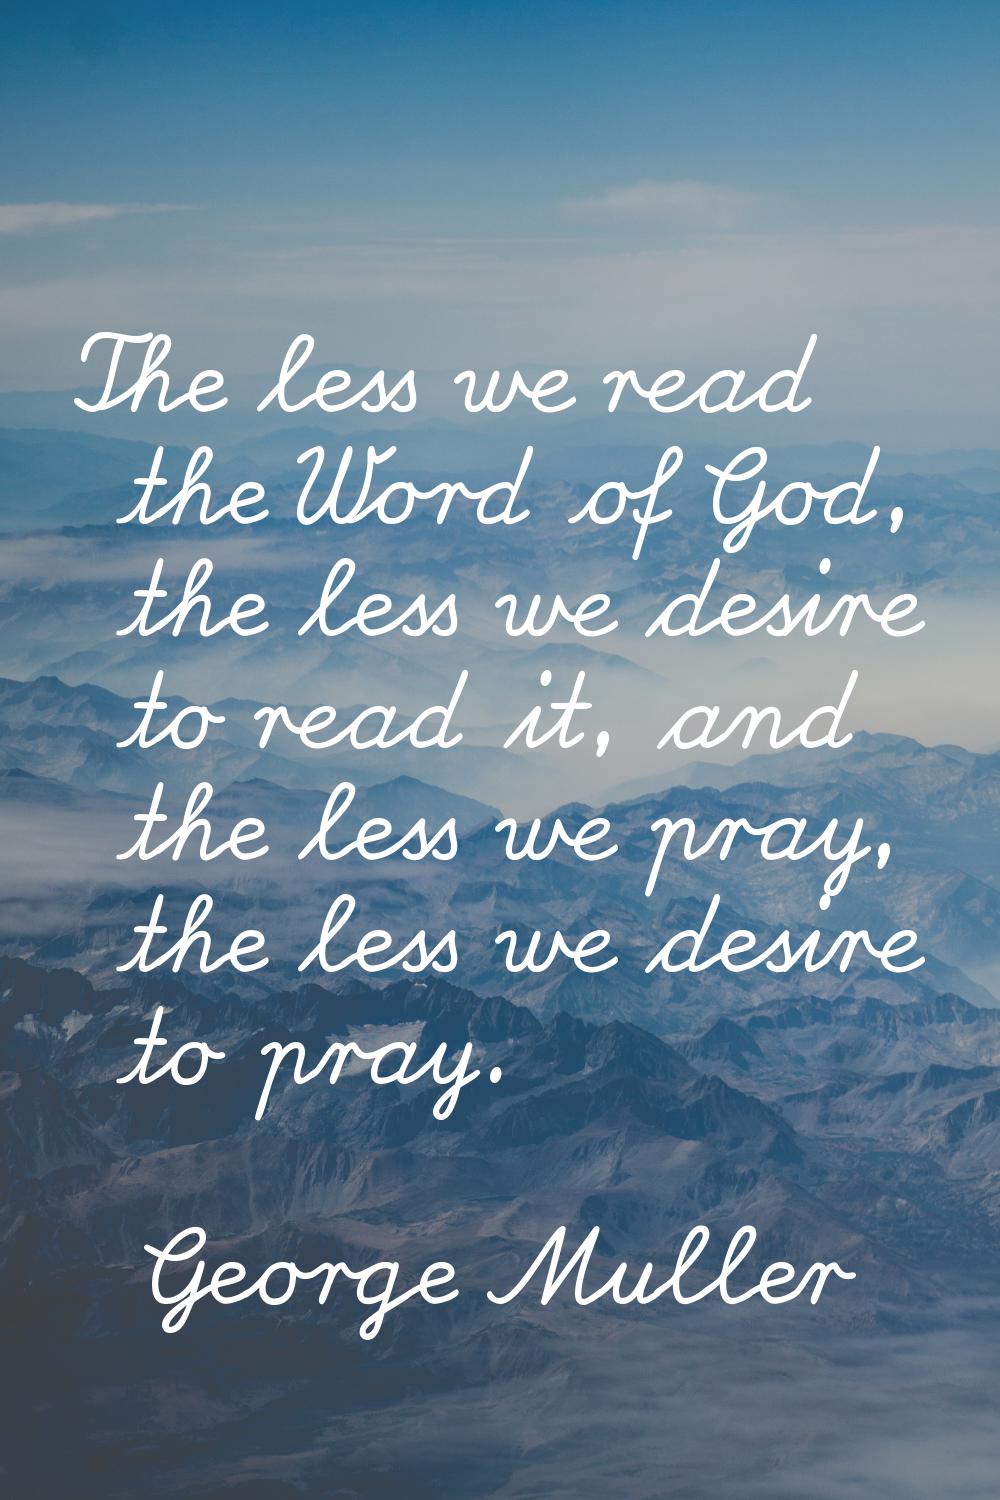 The less we read the Word of God, the less we desire to read it, and the less we pray, the less we 